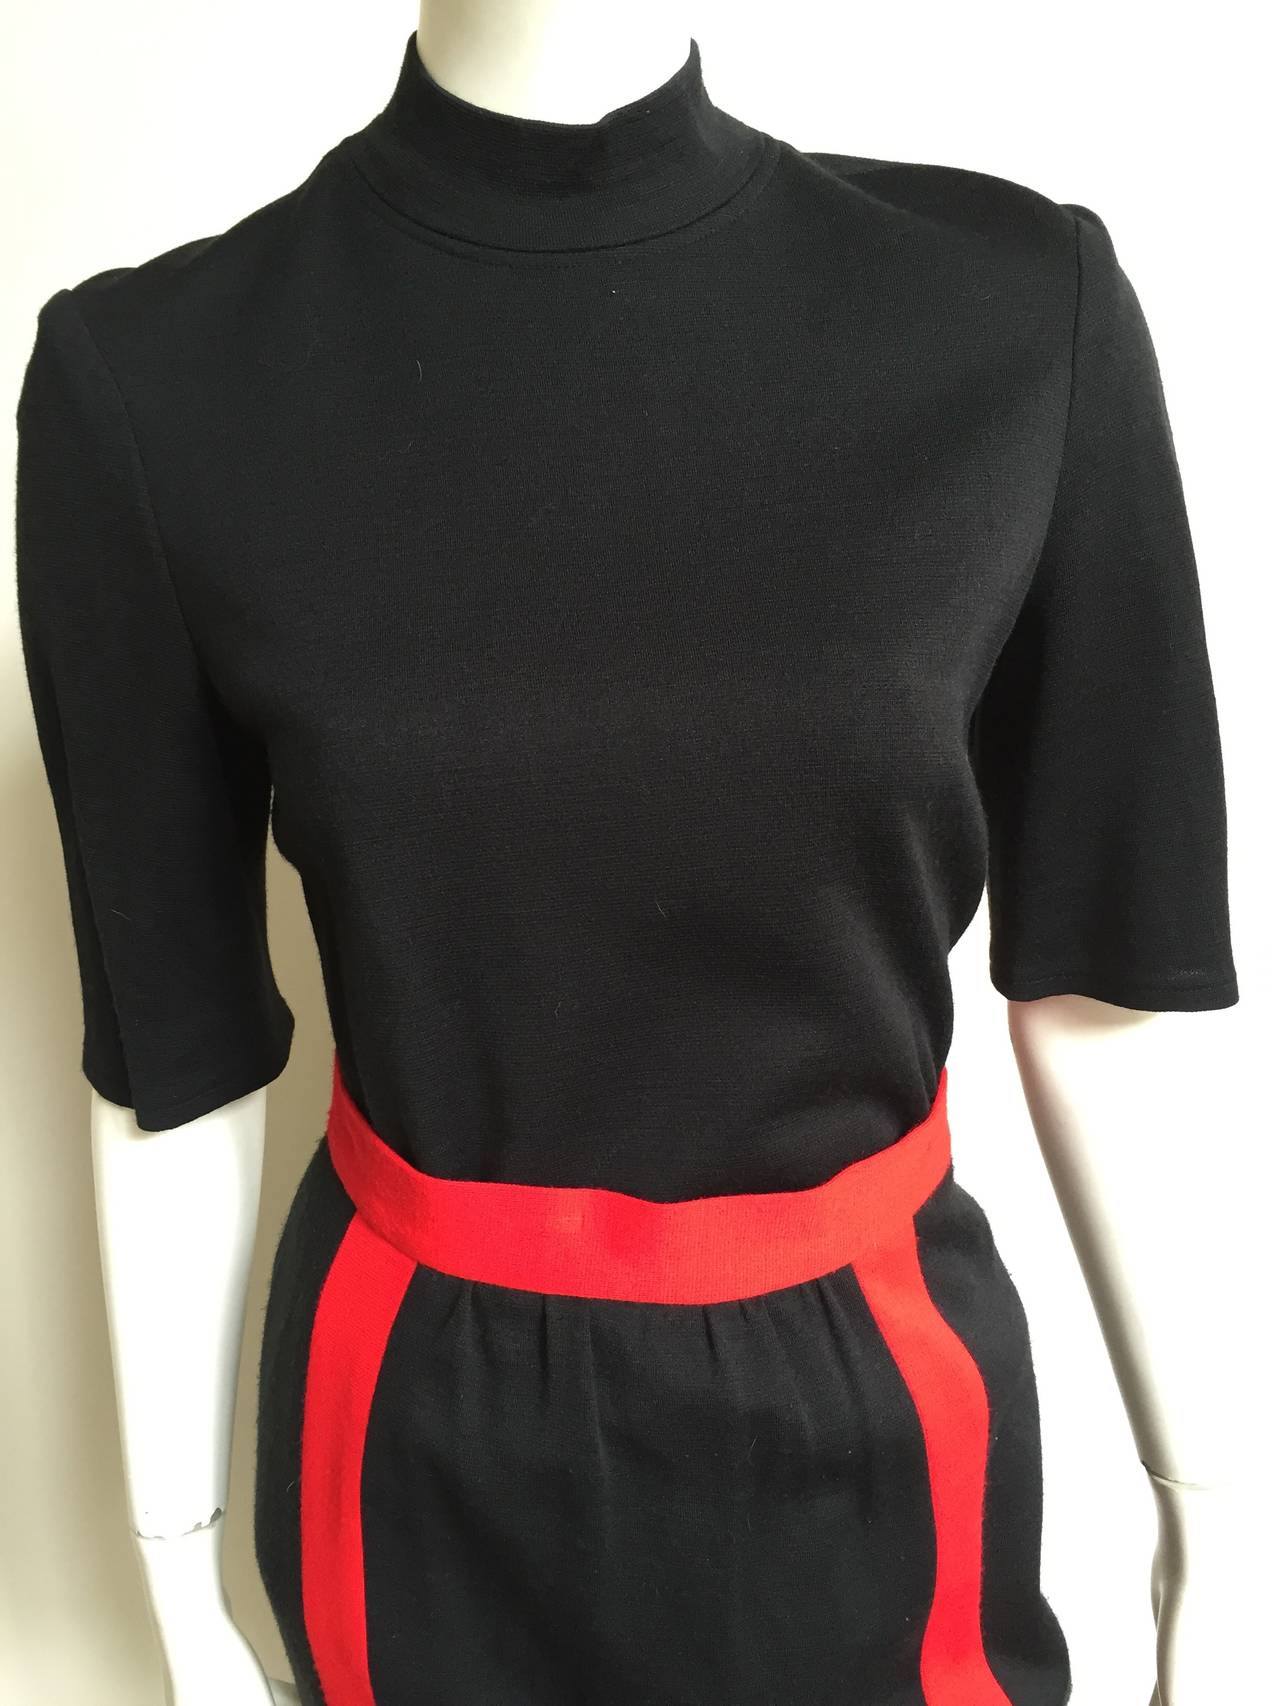 Carven 1960s two piece wool knit top & skirt is a vintage size 8 but fits like a modern USA size 6. ( Please see and use measurements I provide so that you can properly measure that lovely body). Modern knit design is stylish for any occasion.